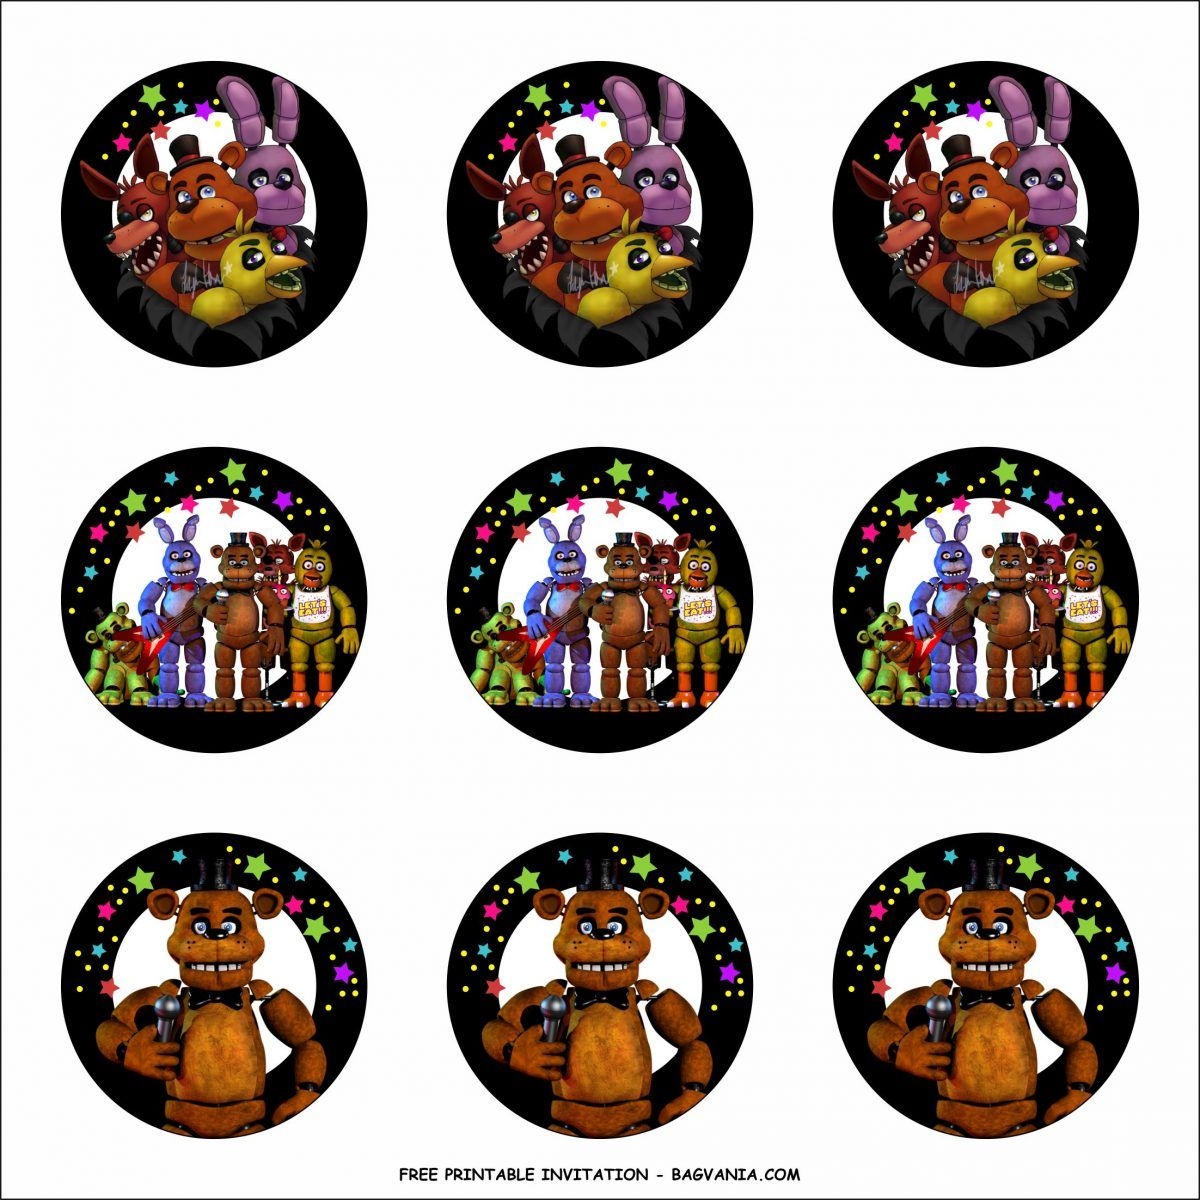 FREE PRINTABLE Five Night At Freddy s Party Kits Template FREE Printable Birthday Invi Party Kits Free Birthday Printables Printable Birthday Invitations